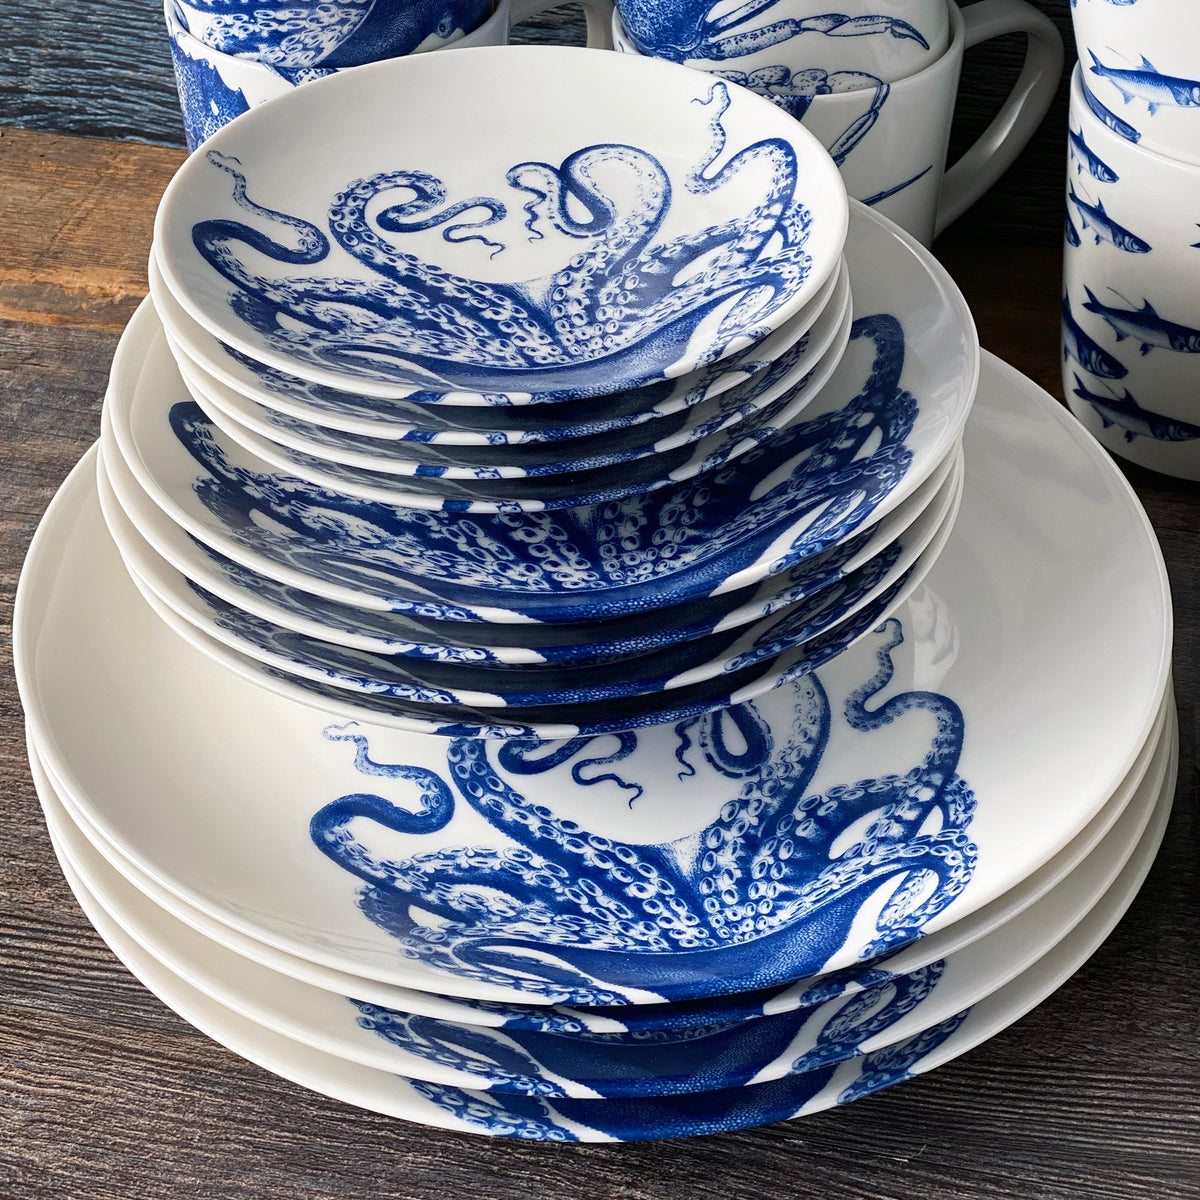 Stacked creamy white Lucy Coupe Dinner Plates by Caskata Artisanal Home with blue octopus designs, arranged on a wooden surface, with matching mugs in the background.